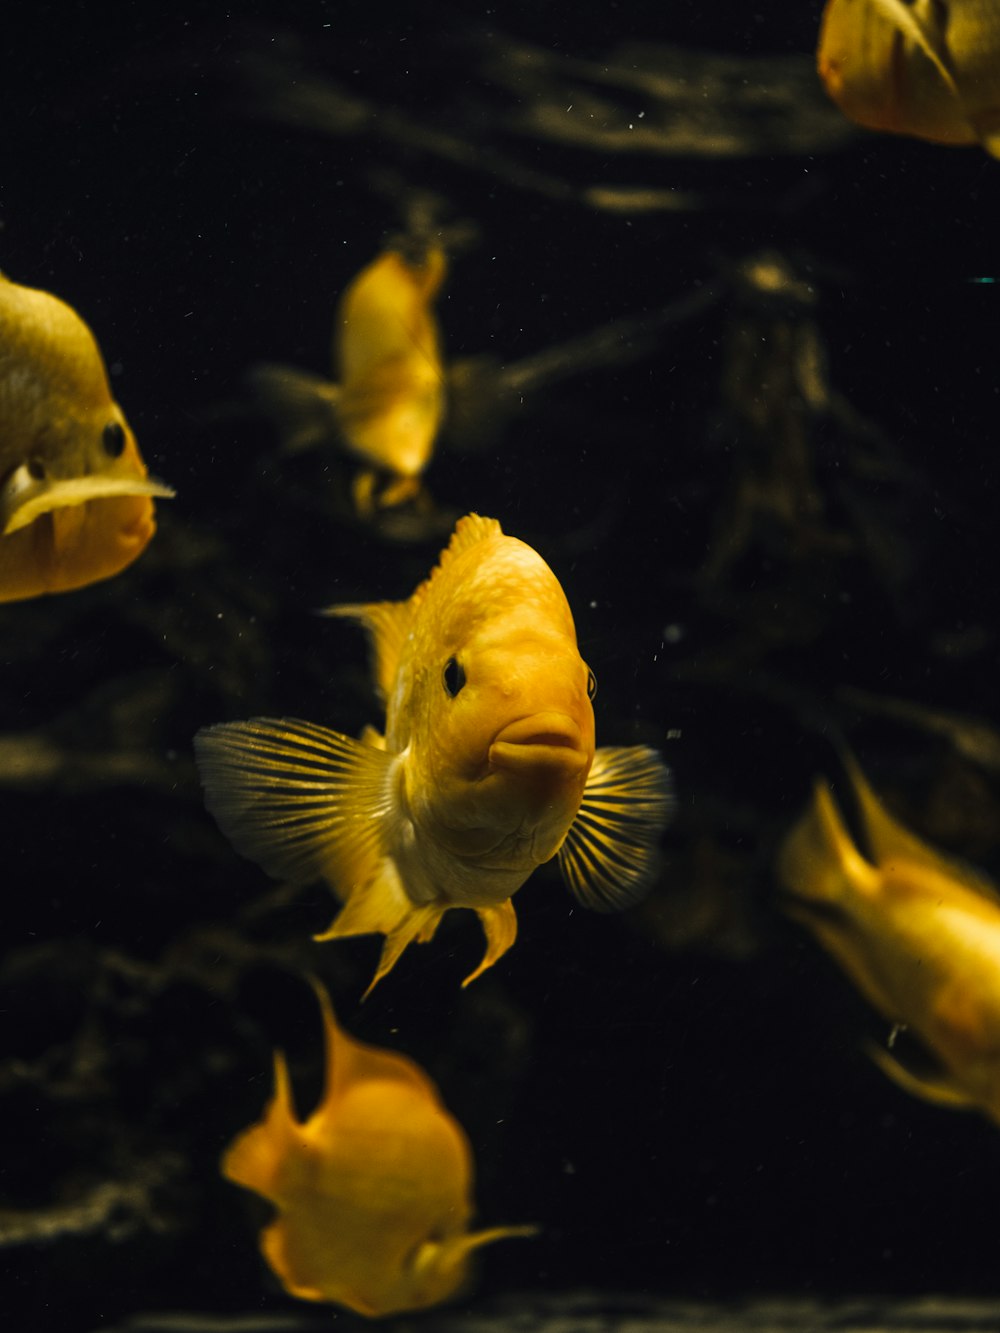 yellow and white fish in water